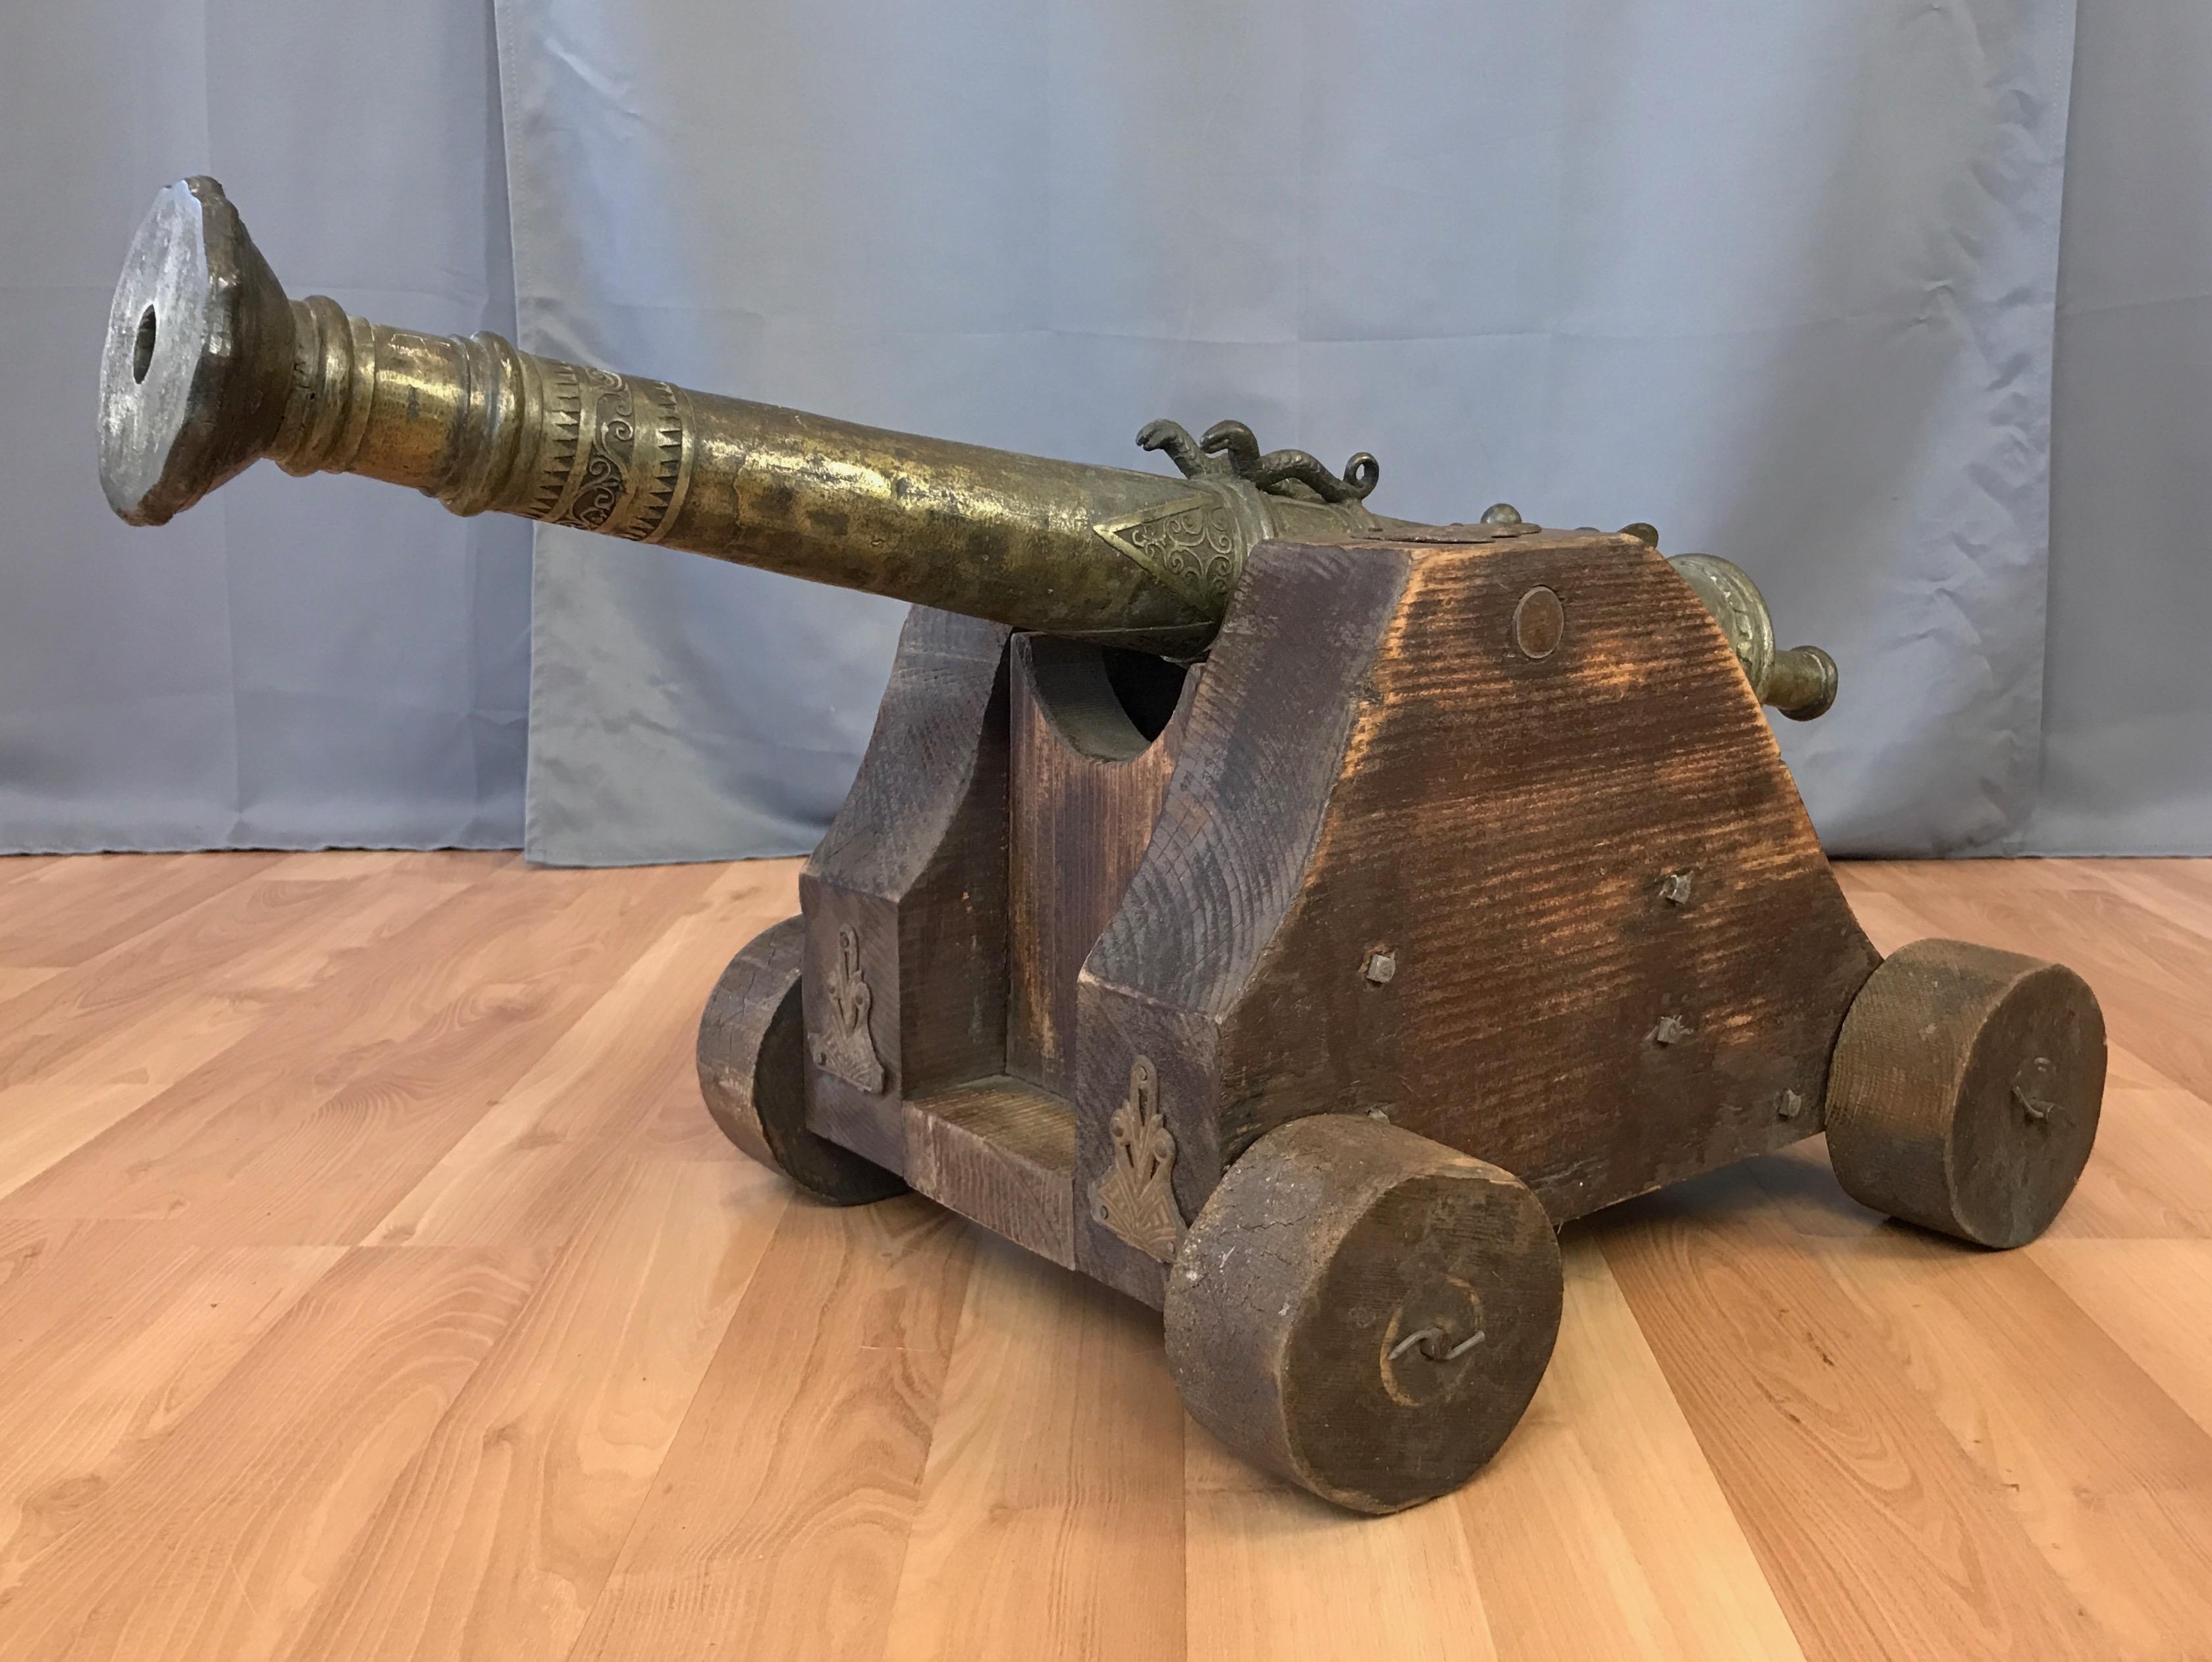 A circa 1900 cast brass lantaka cannon from maritime South East Asia, presented on a more recent custom made wood display carriage.

Used primarily for defense, lantaka (or rentaka) were a type of brass or bronze swivel gun found on warships and